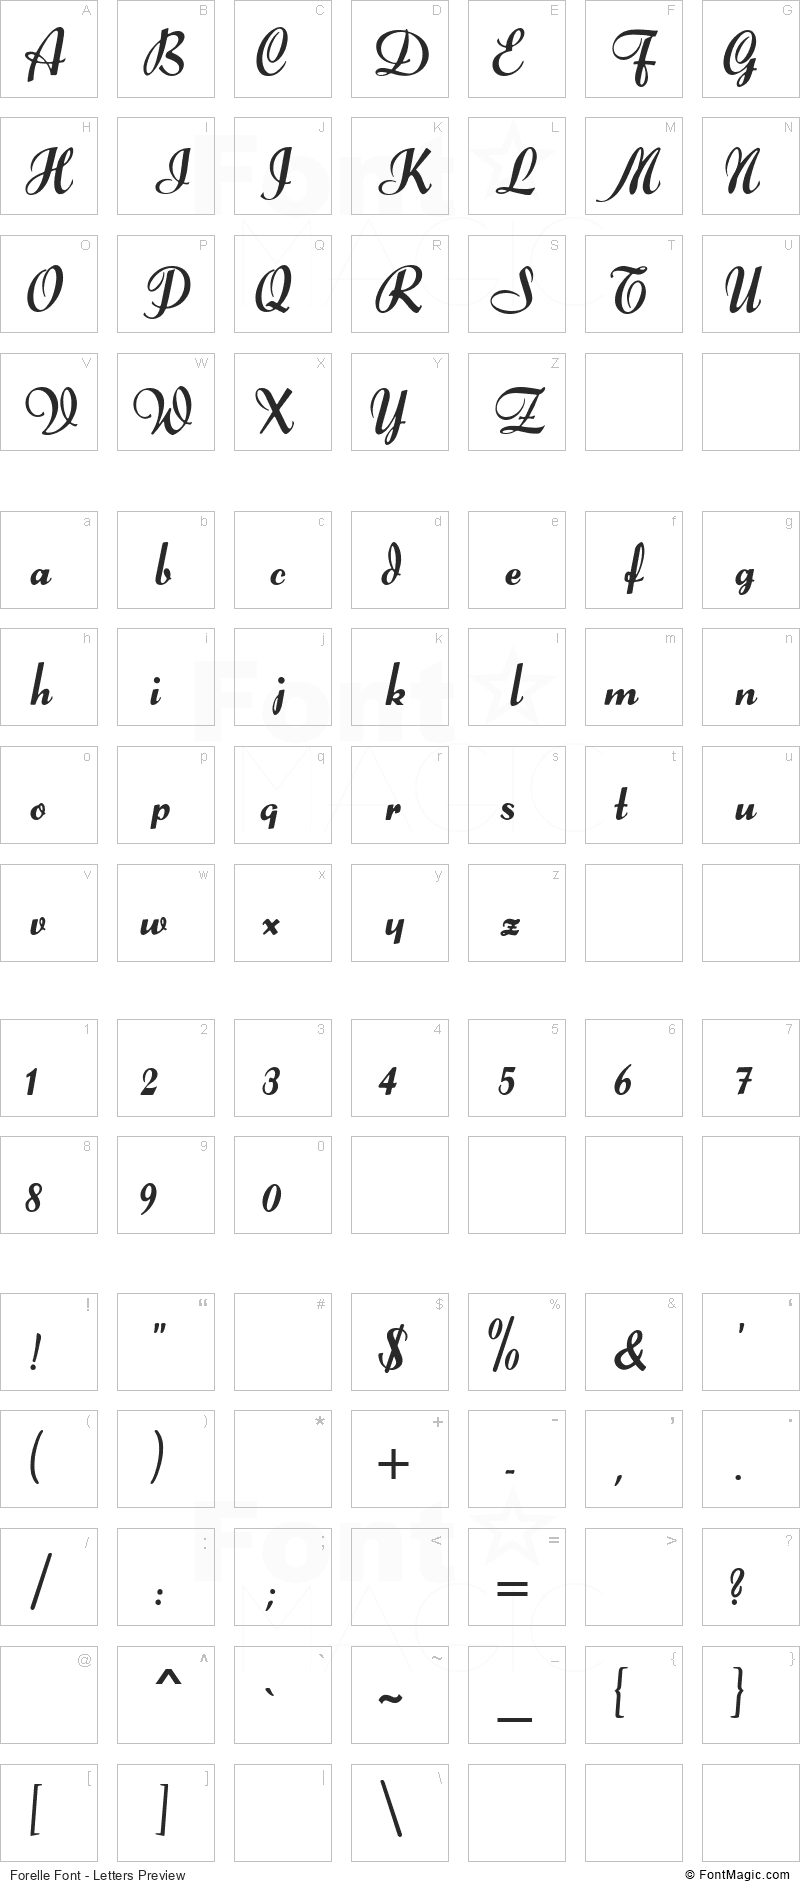 Forelle Font - All Latters Preview Chart